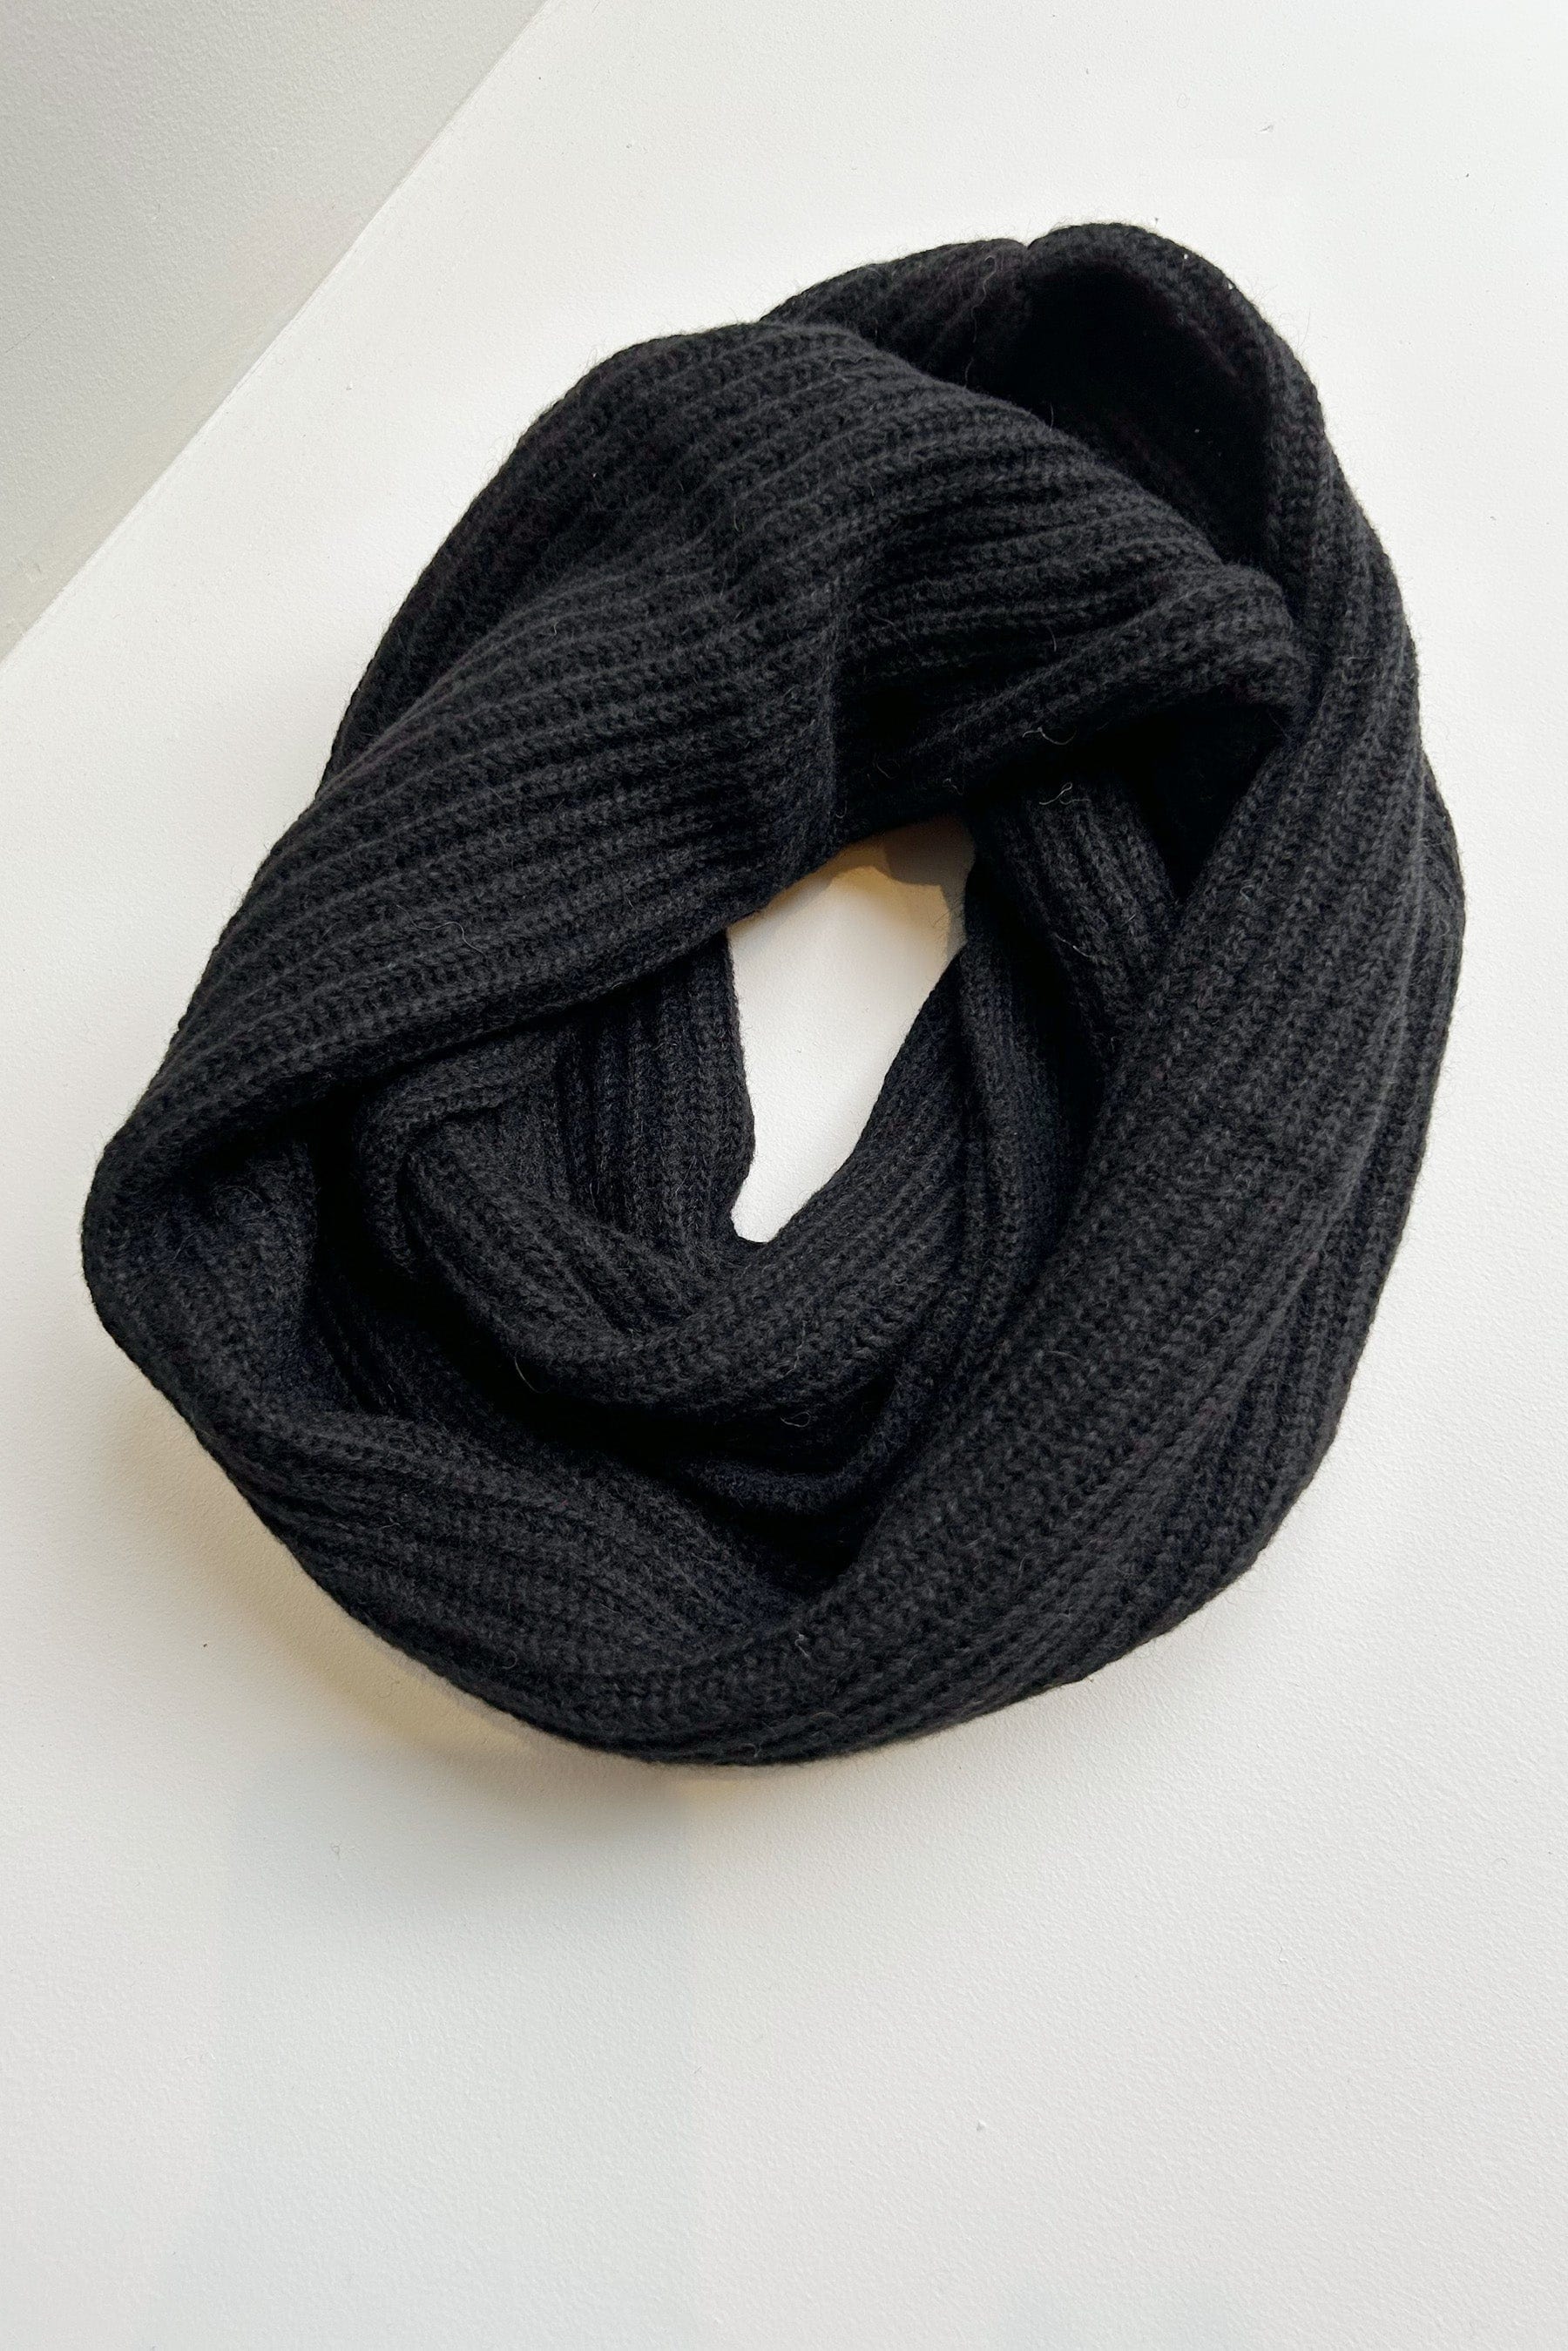 Infinity Scarf in Alpaca Wool Blend Scarves CHRISTINE ALCALAY Black One Size 